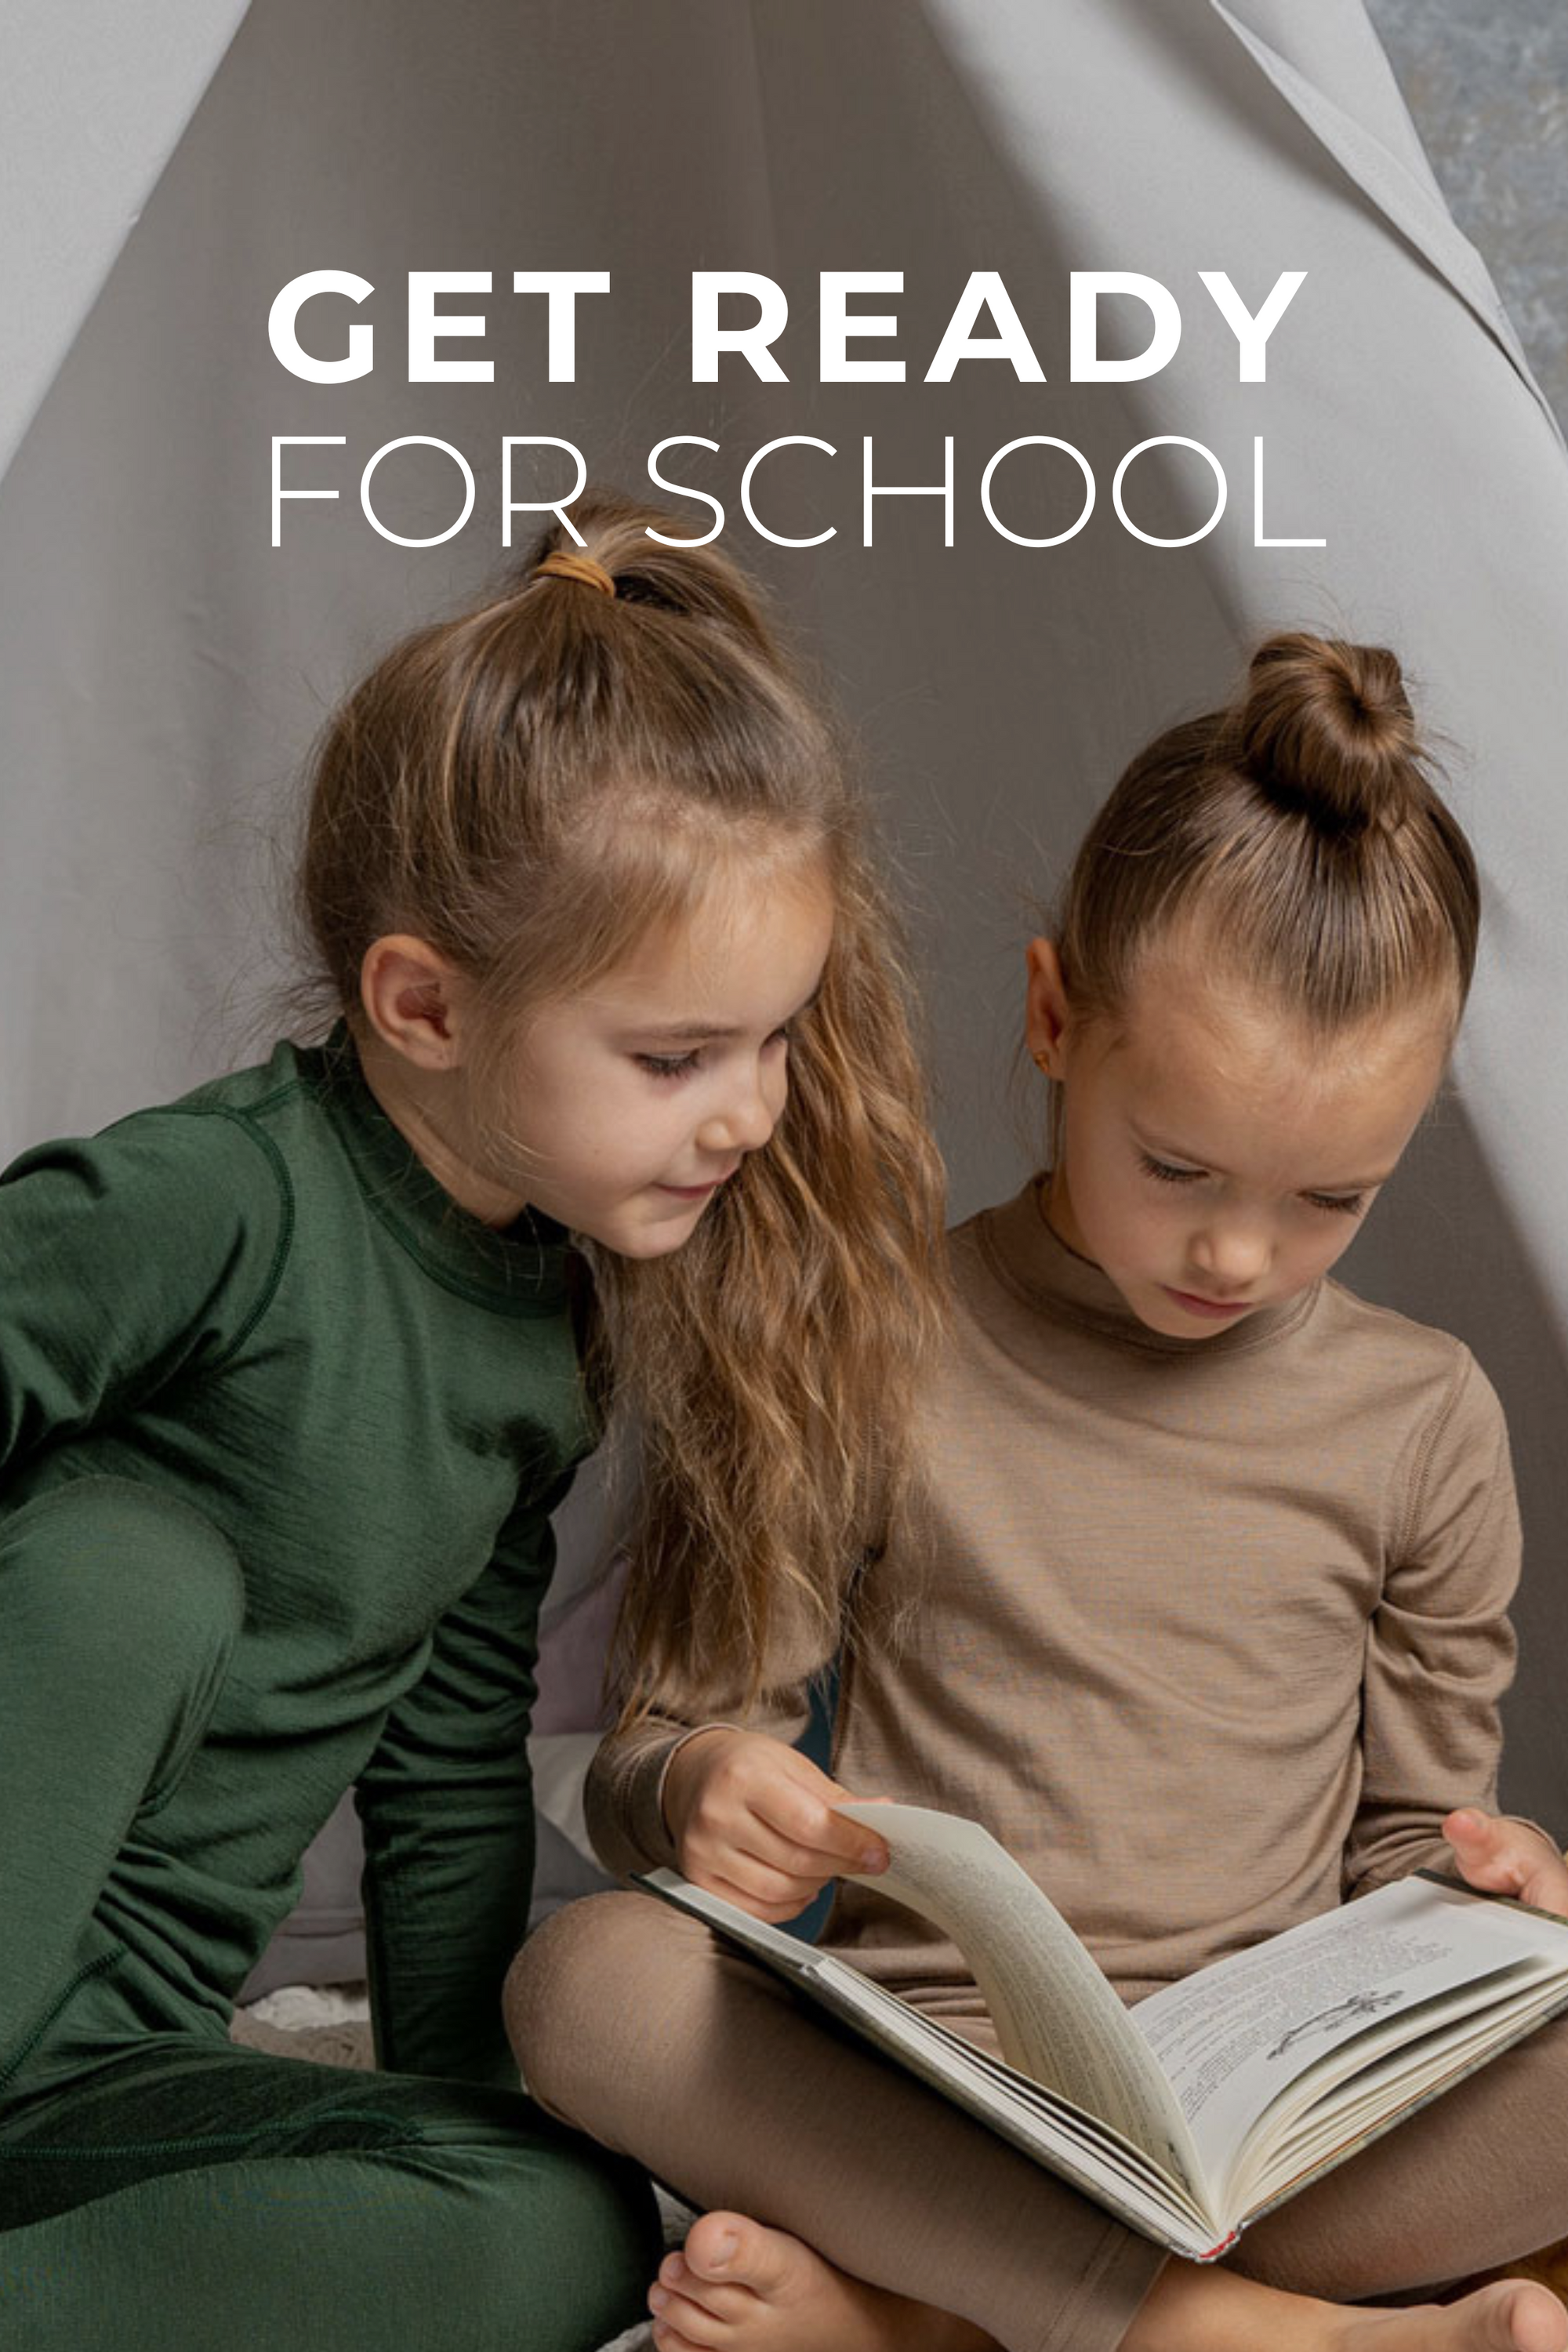 Get Ready For The New School Year. Shop Sustainable Durable Kids Clothing